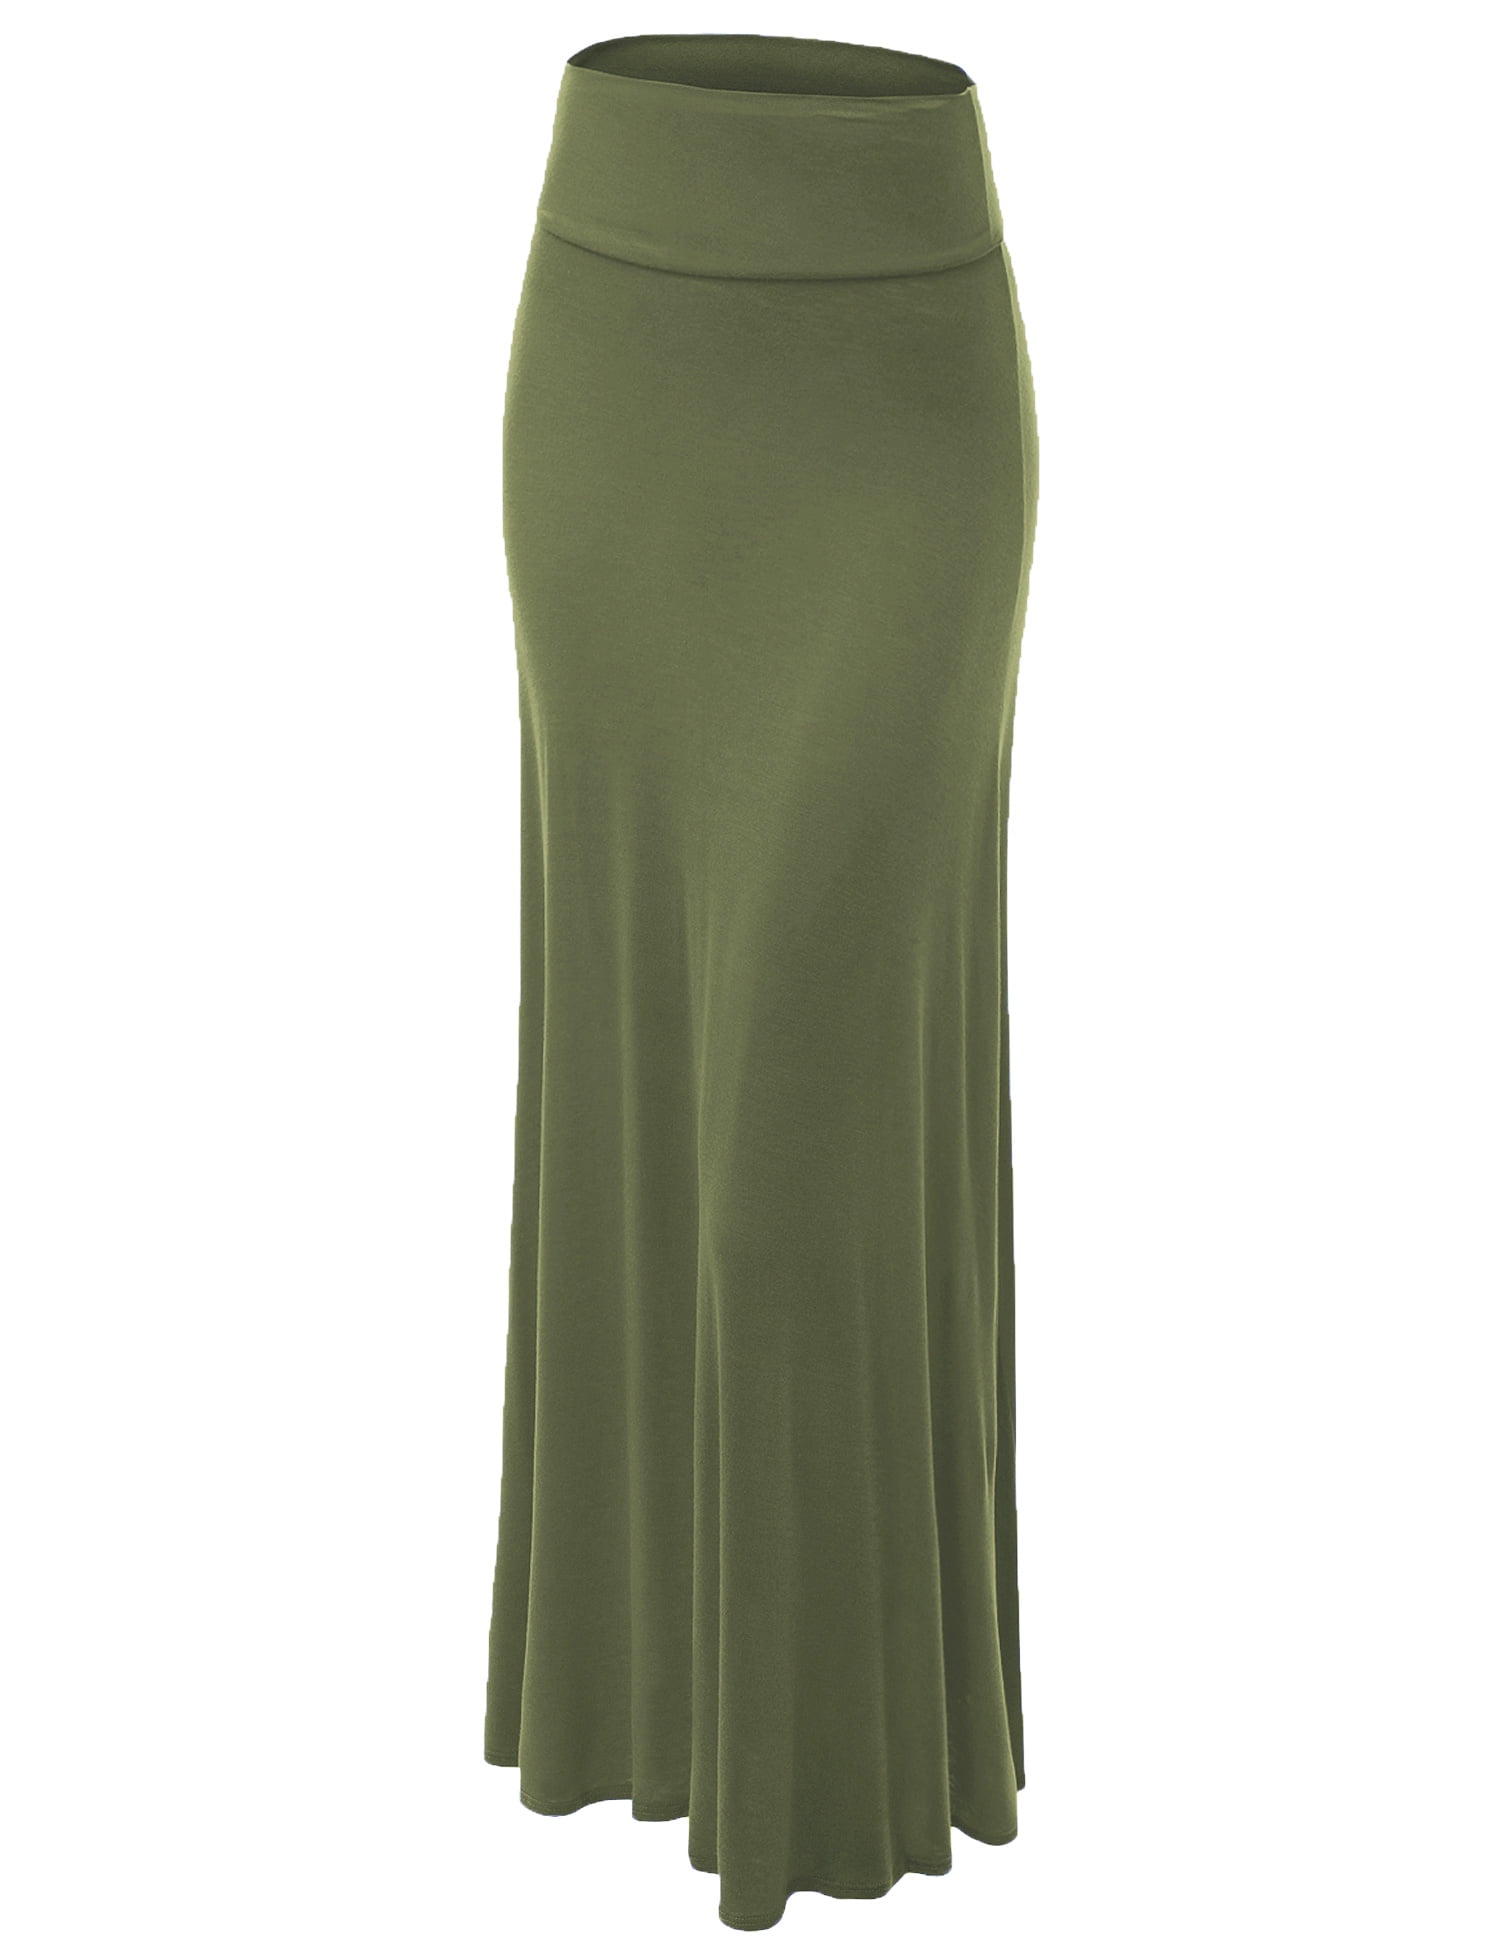 Made by Johnny Women's Fold-Over Maxi Skirt L OLIVE - Walmart.com